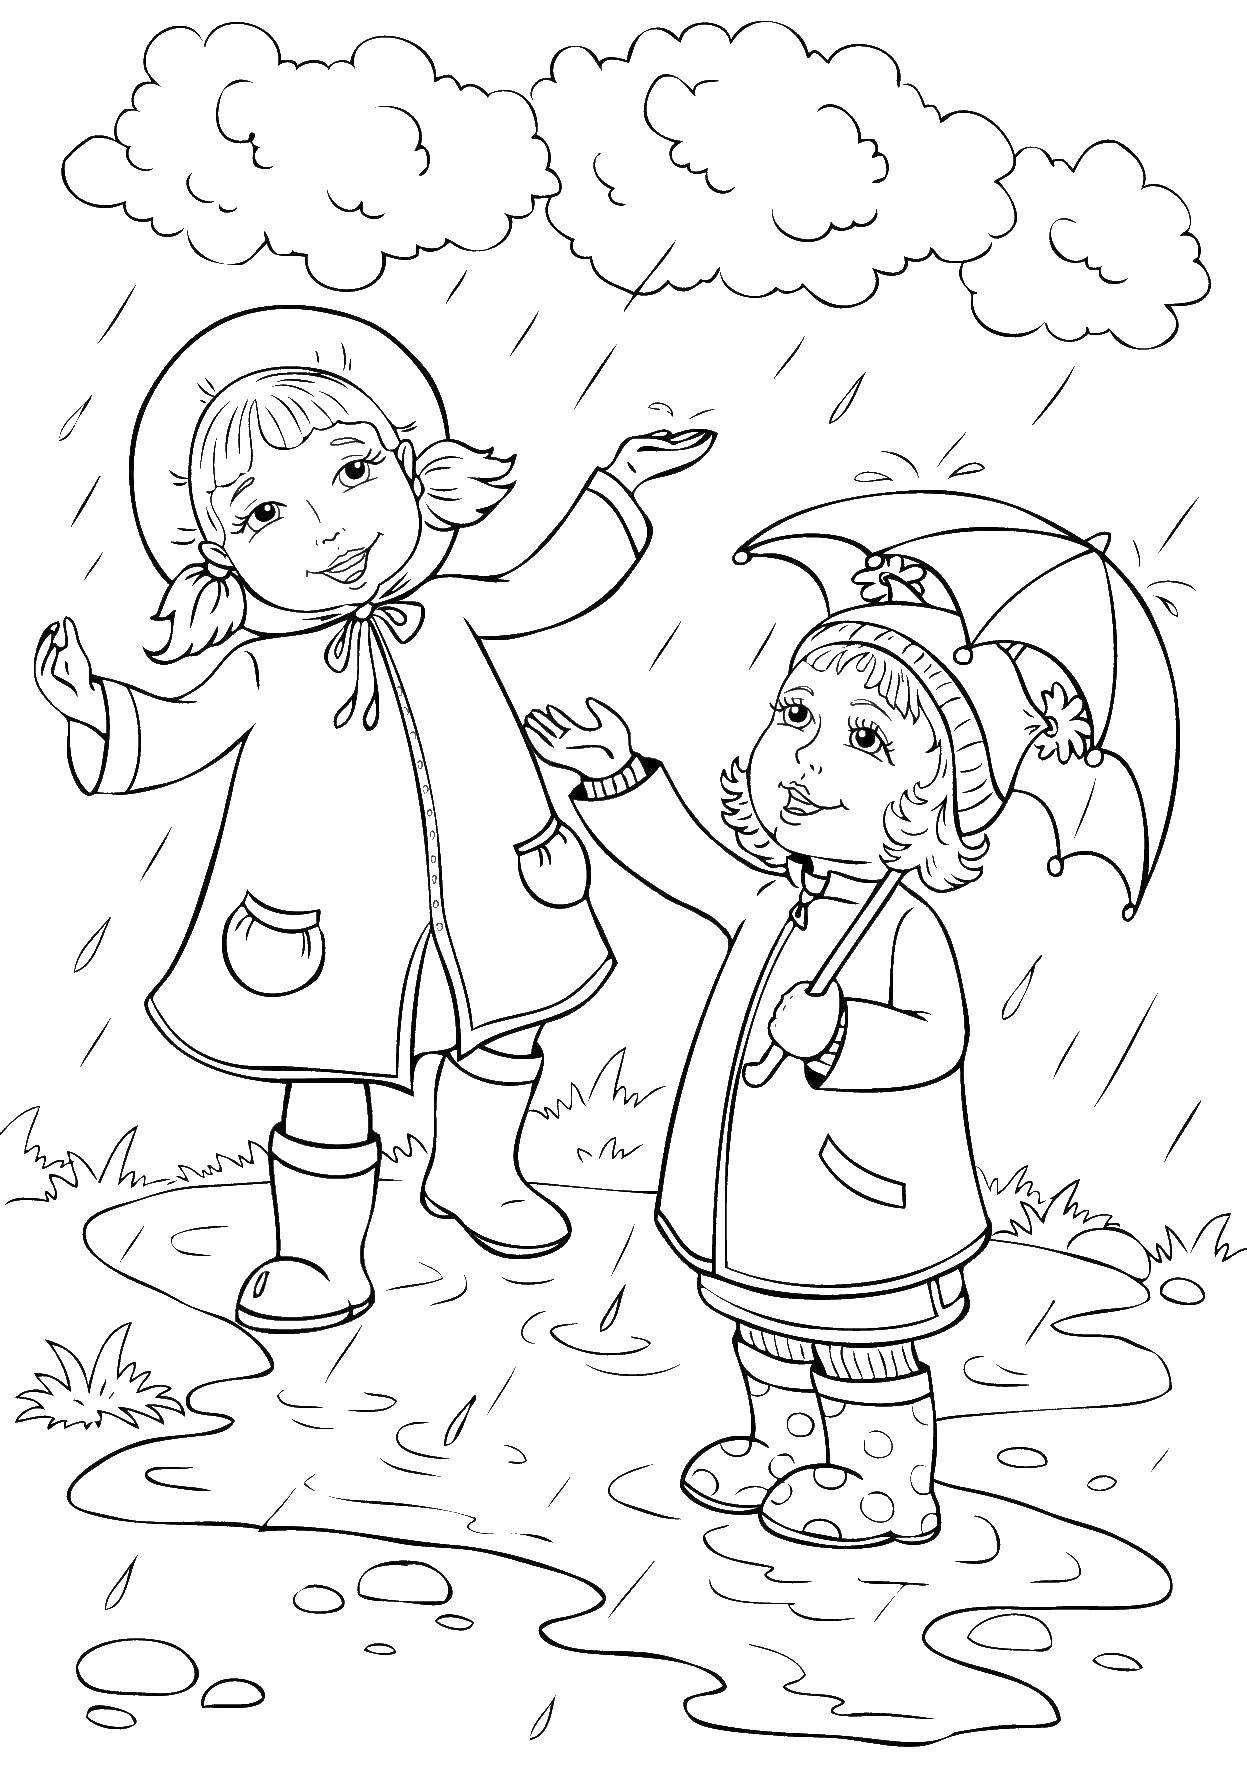 Coloring Children playing in the rain. Category autumn. Tags:  rain, umbrella.